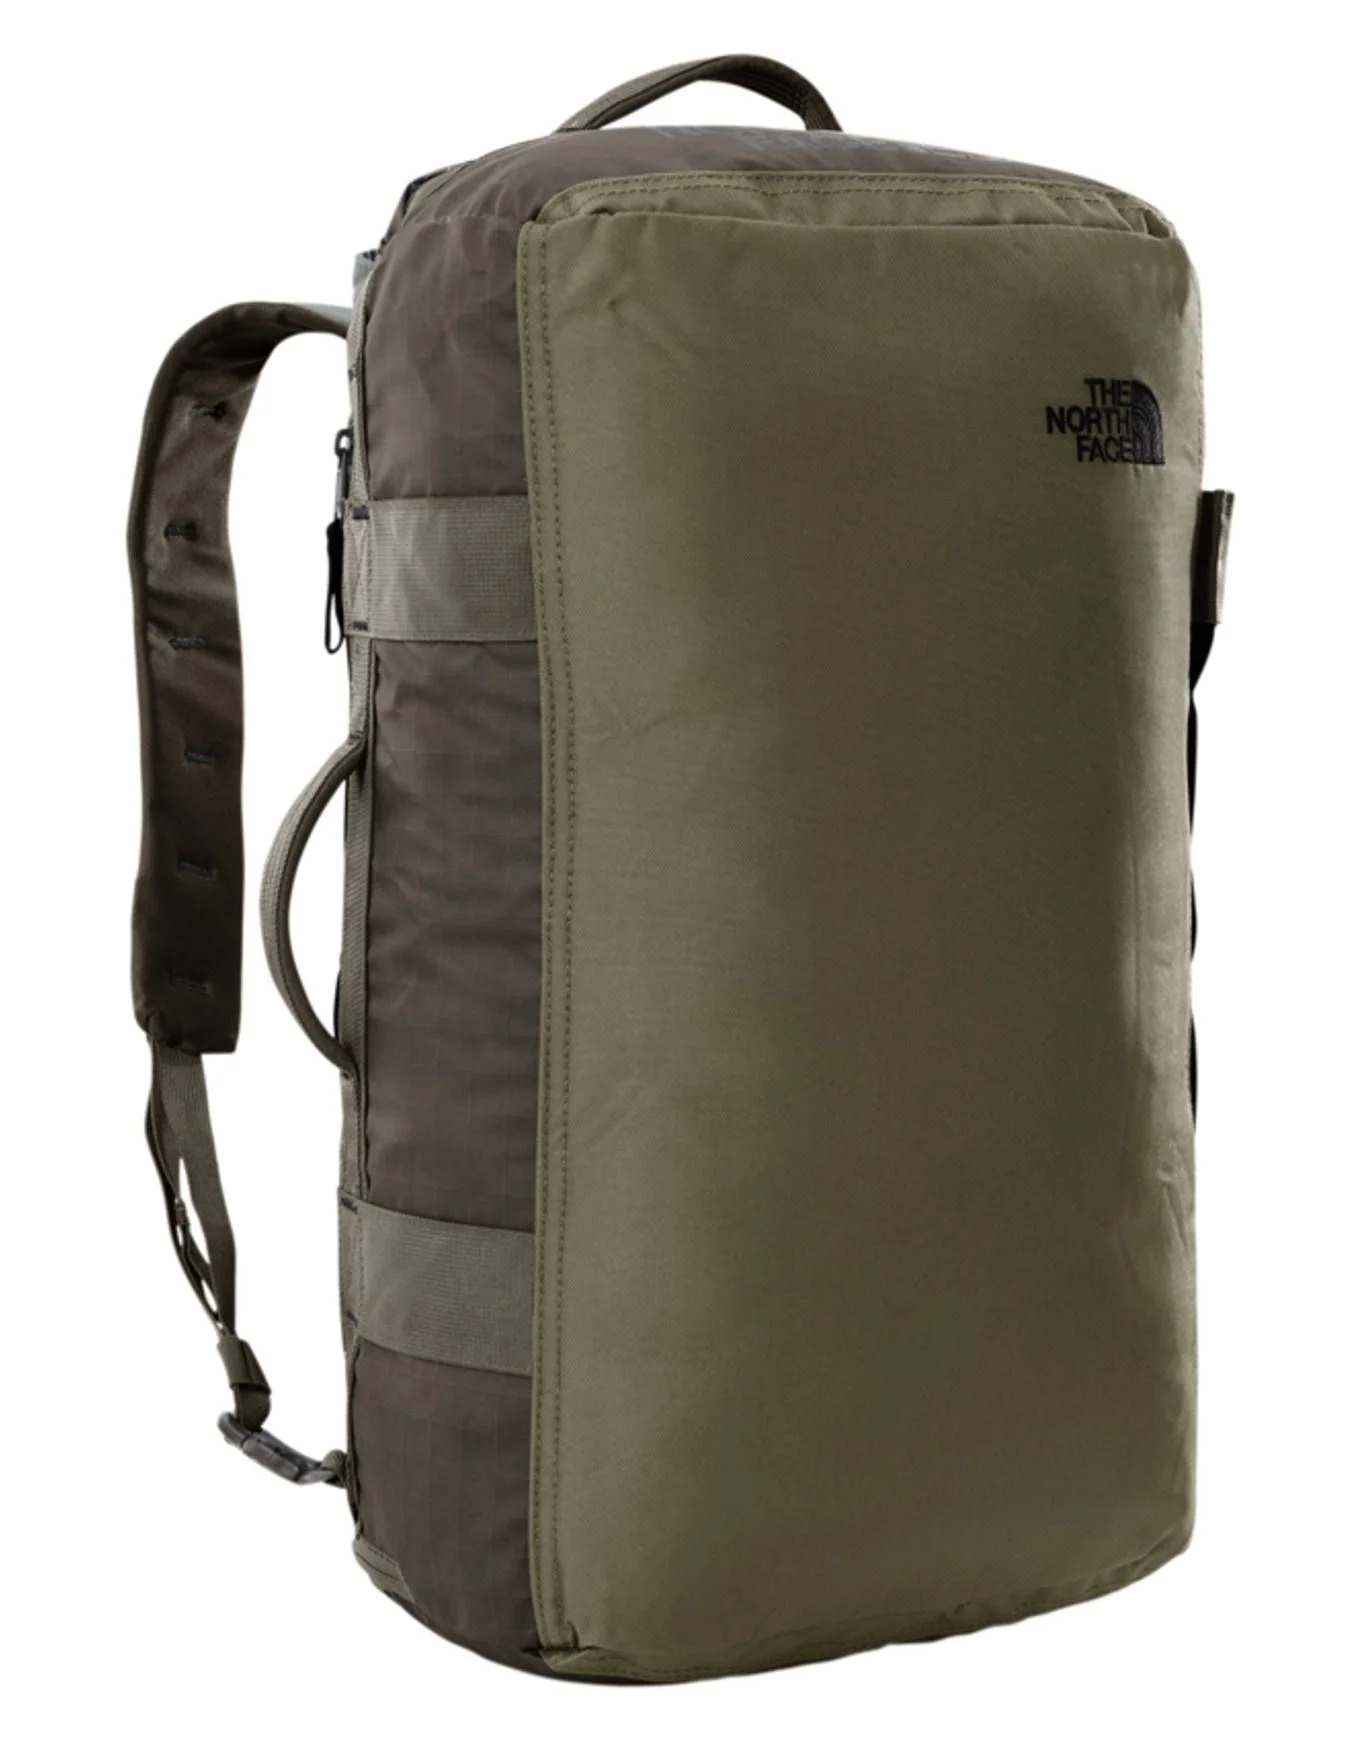 Duffel Bag Base Camp Voyager 32 L - New Taupe Green-TNF Black